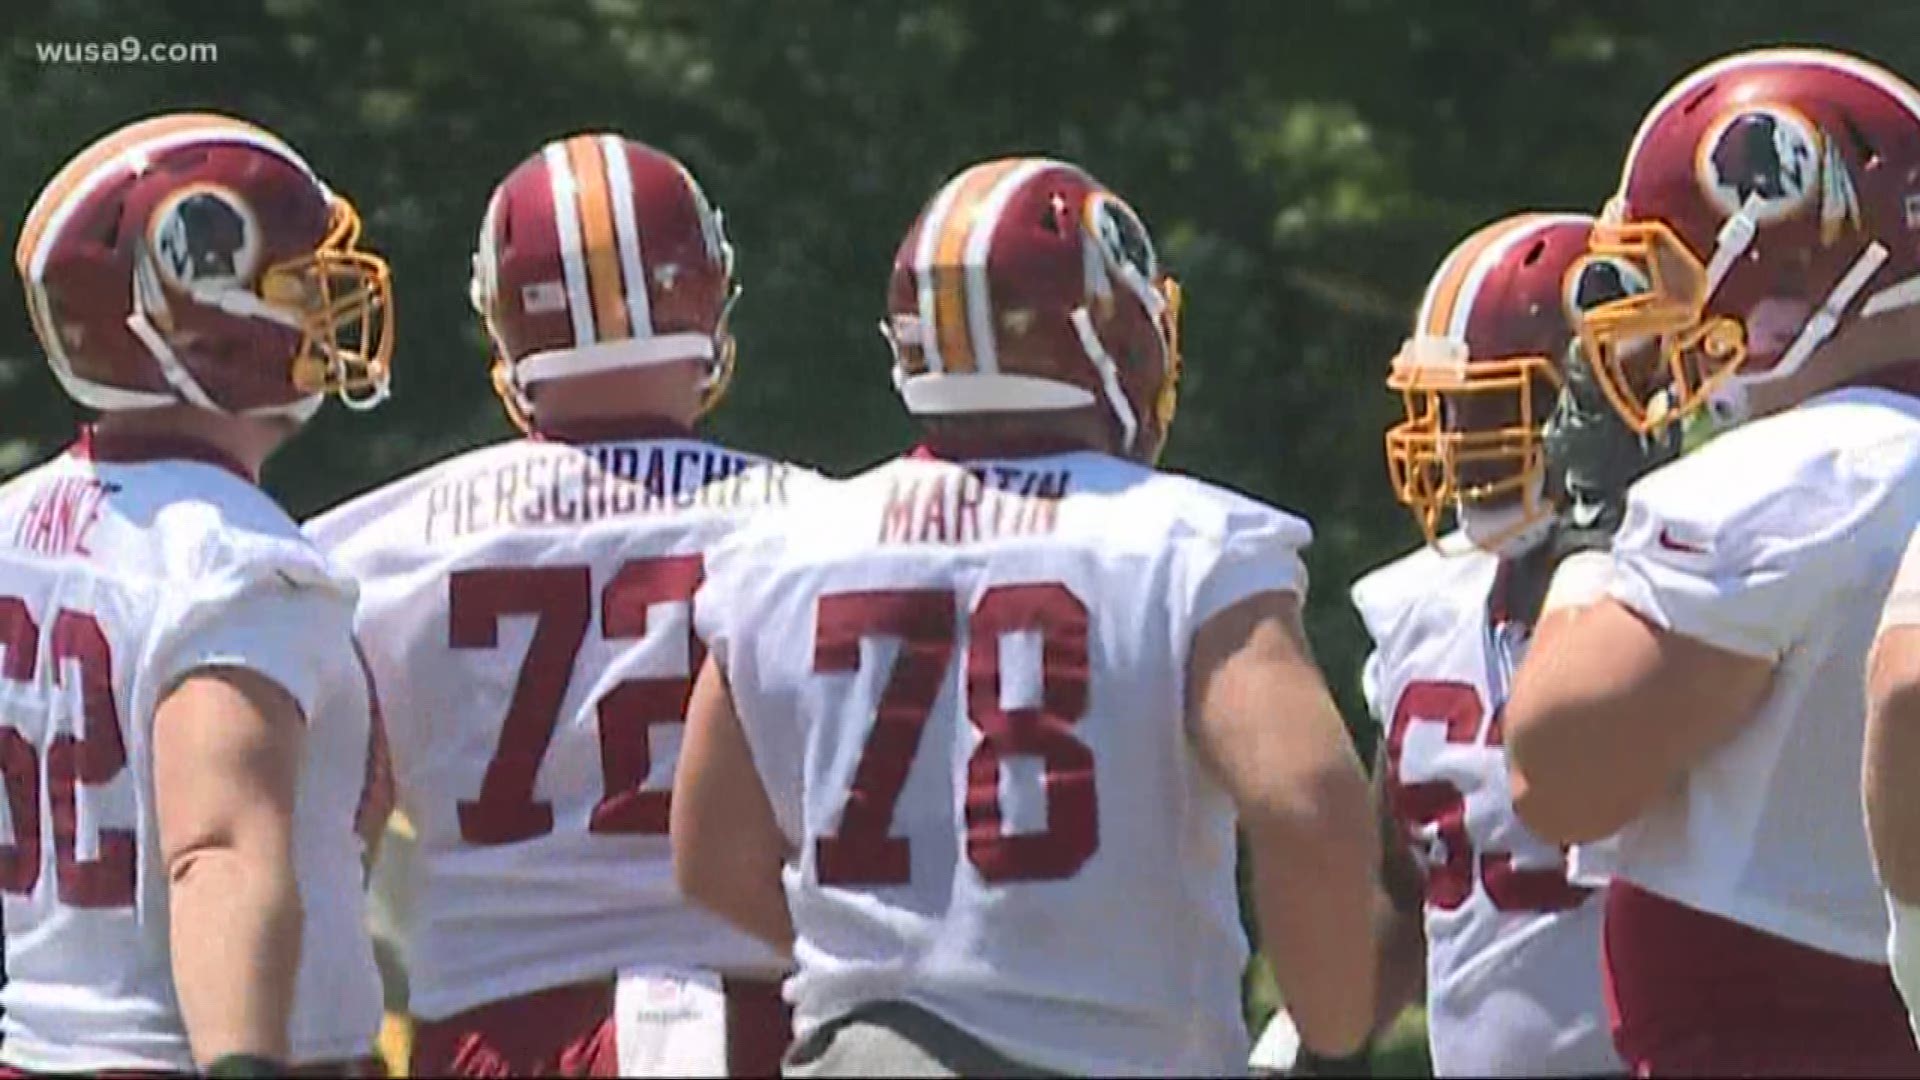 With several Redskins lineman injured, and Trent Williams holding out, there's uncertainty on the offensive line.